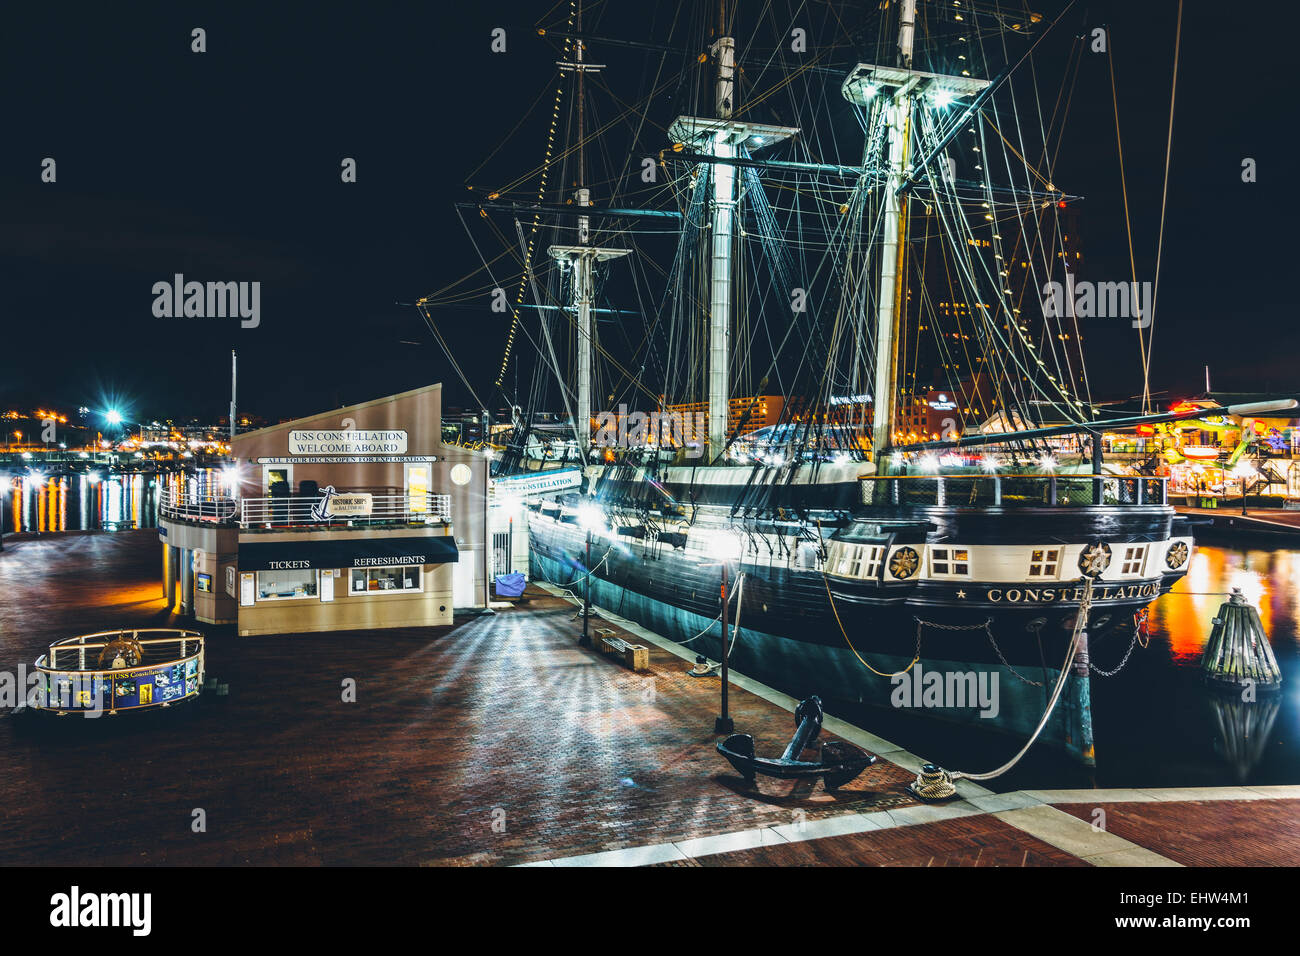 The USS Constellation at night, in the Inner Harbor of Baltimore, Maryland. Stock Photo